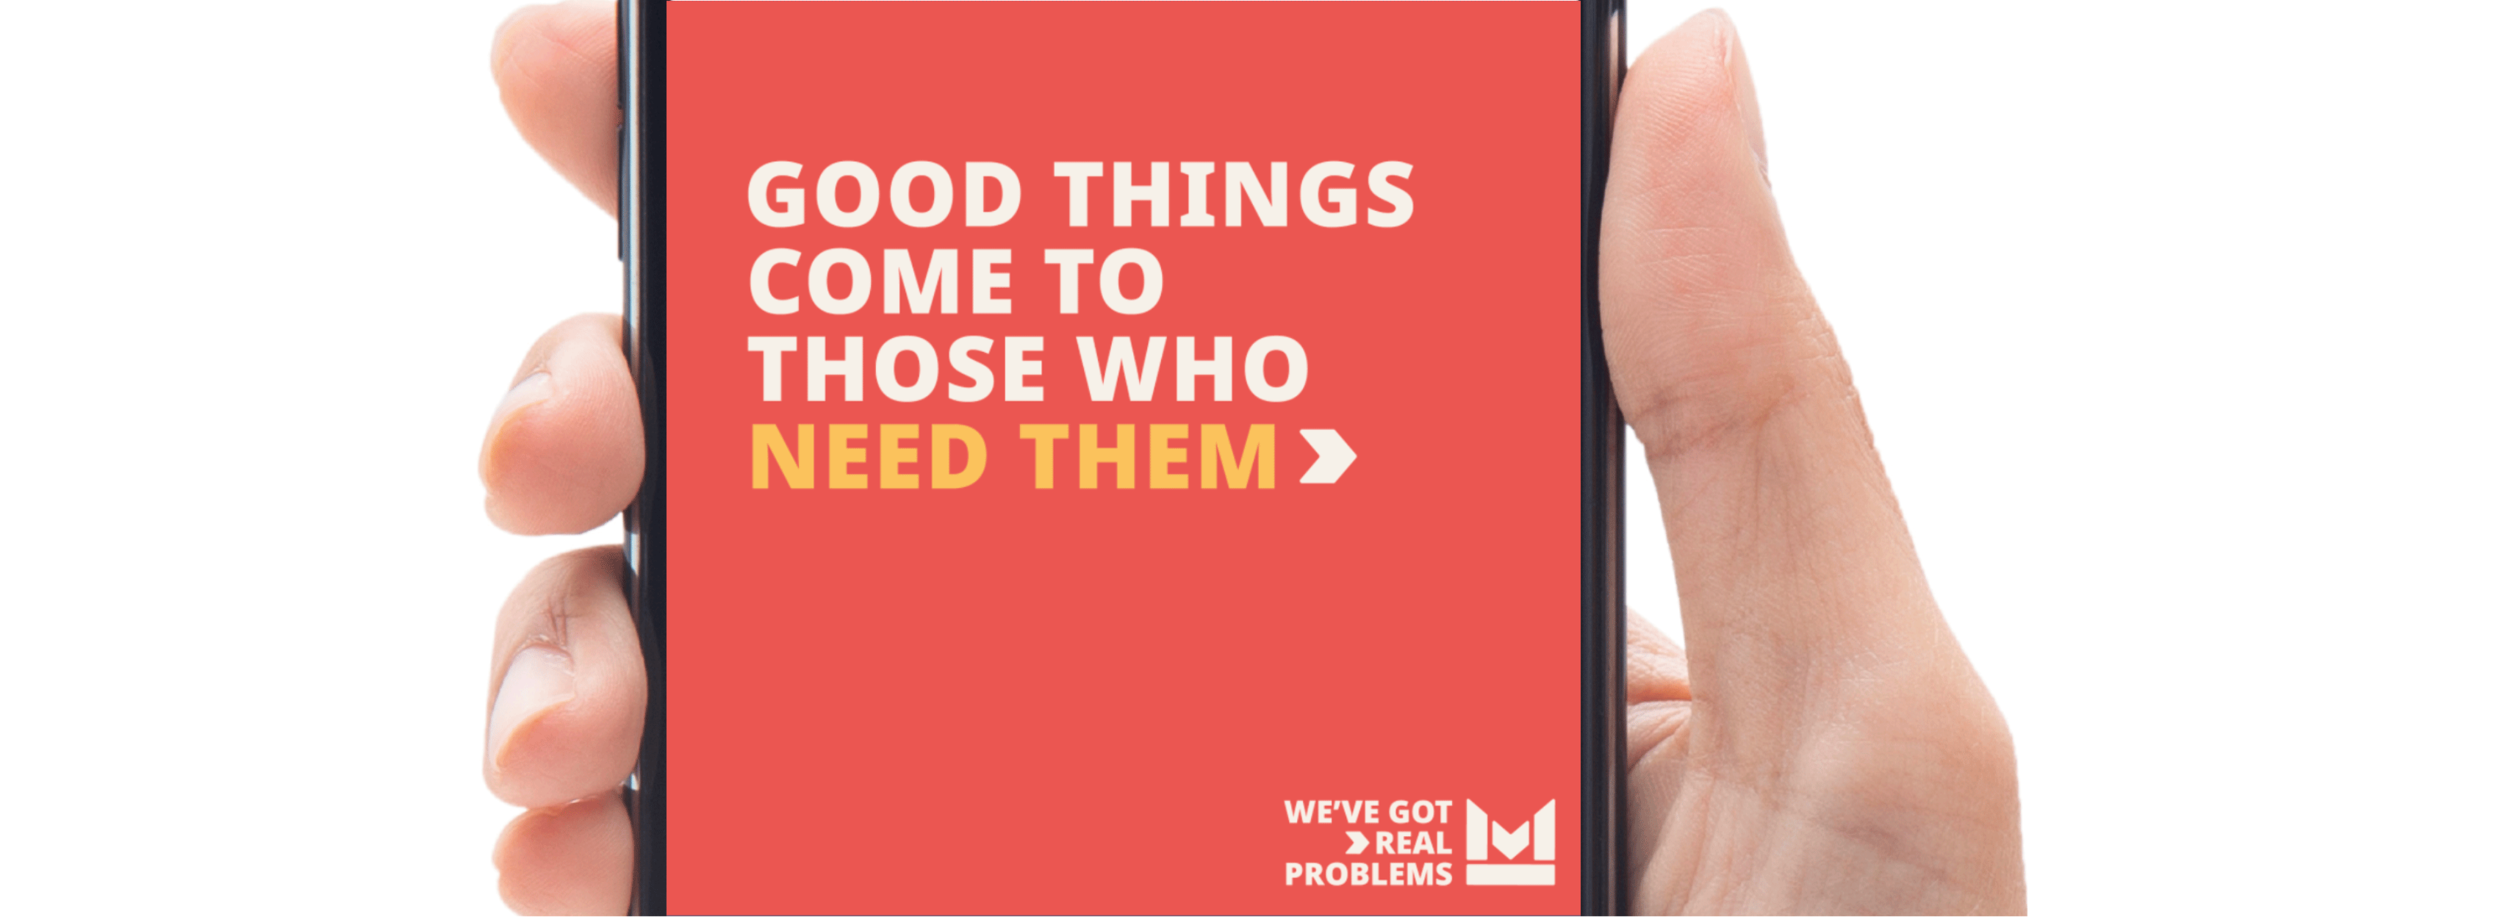 Good things come to those who need them